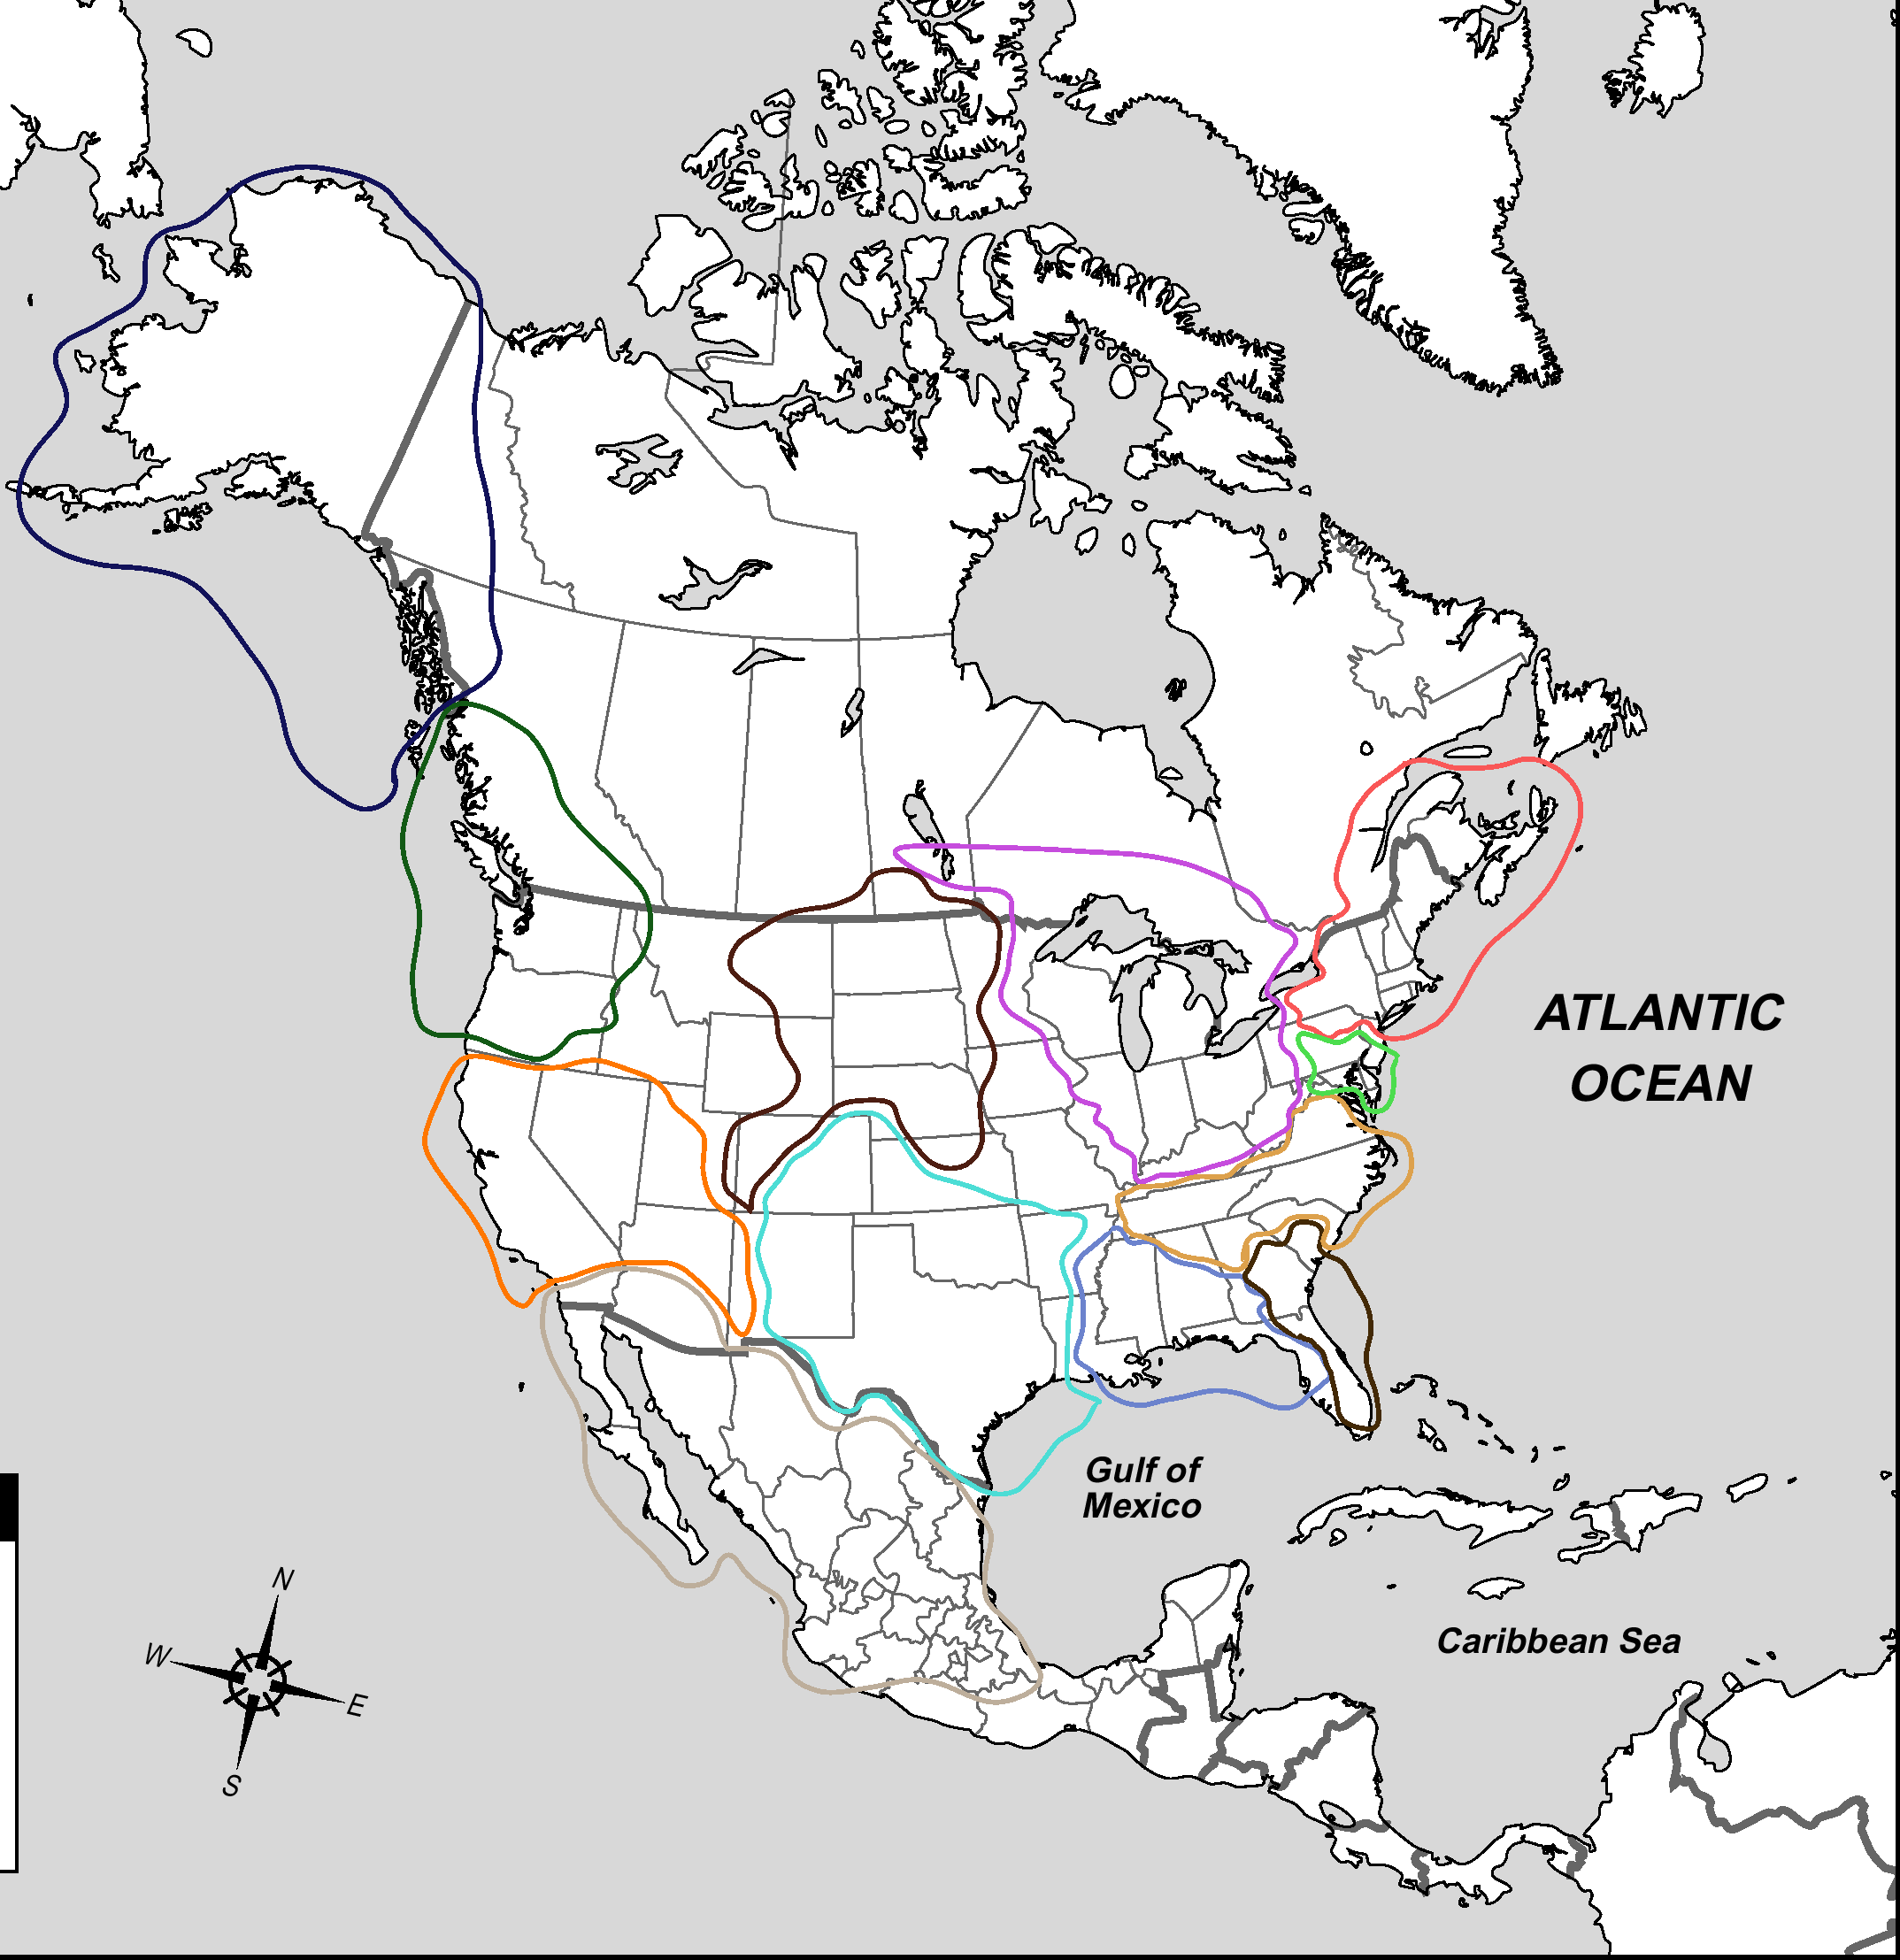 north-america-political-outline-map-full-size-within.png